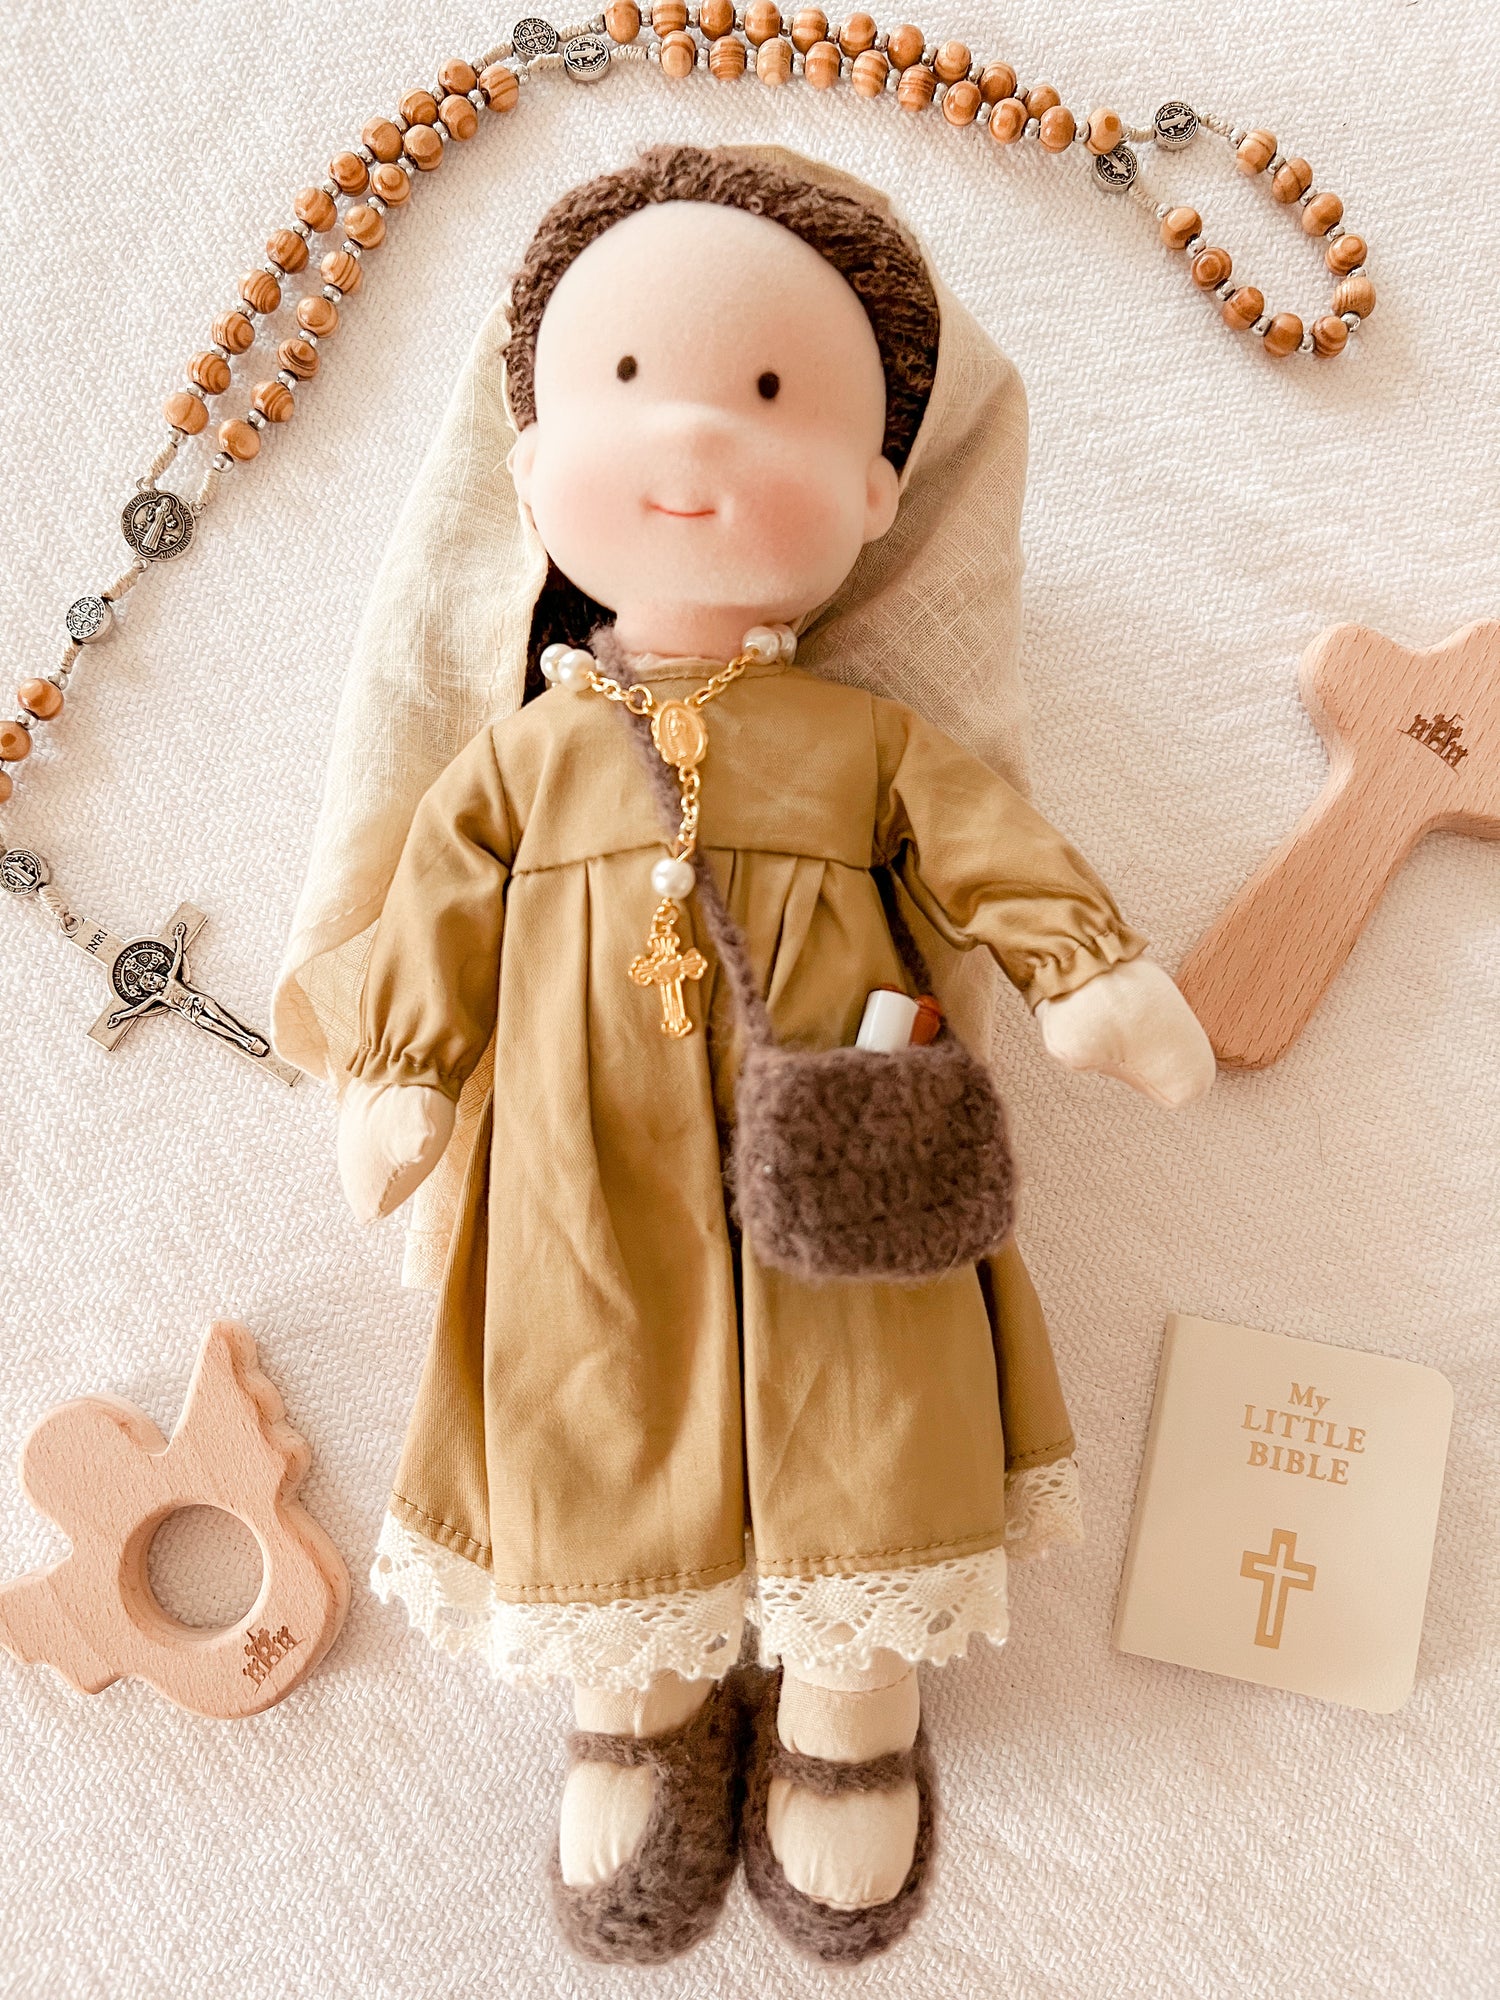 Blessed Virgin Mary Doll